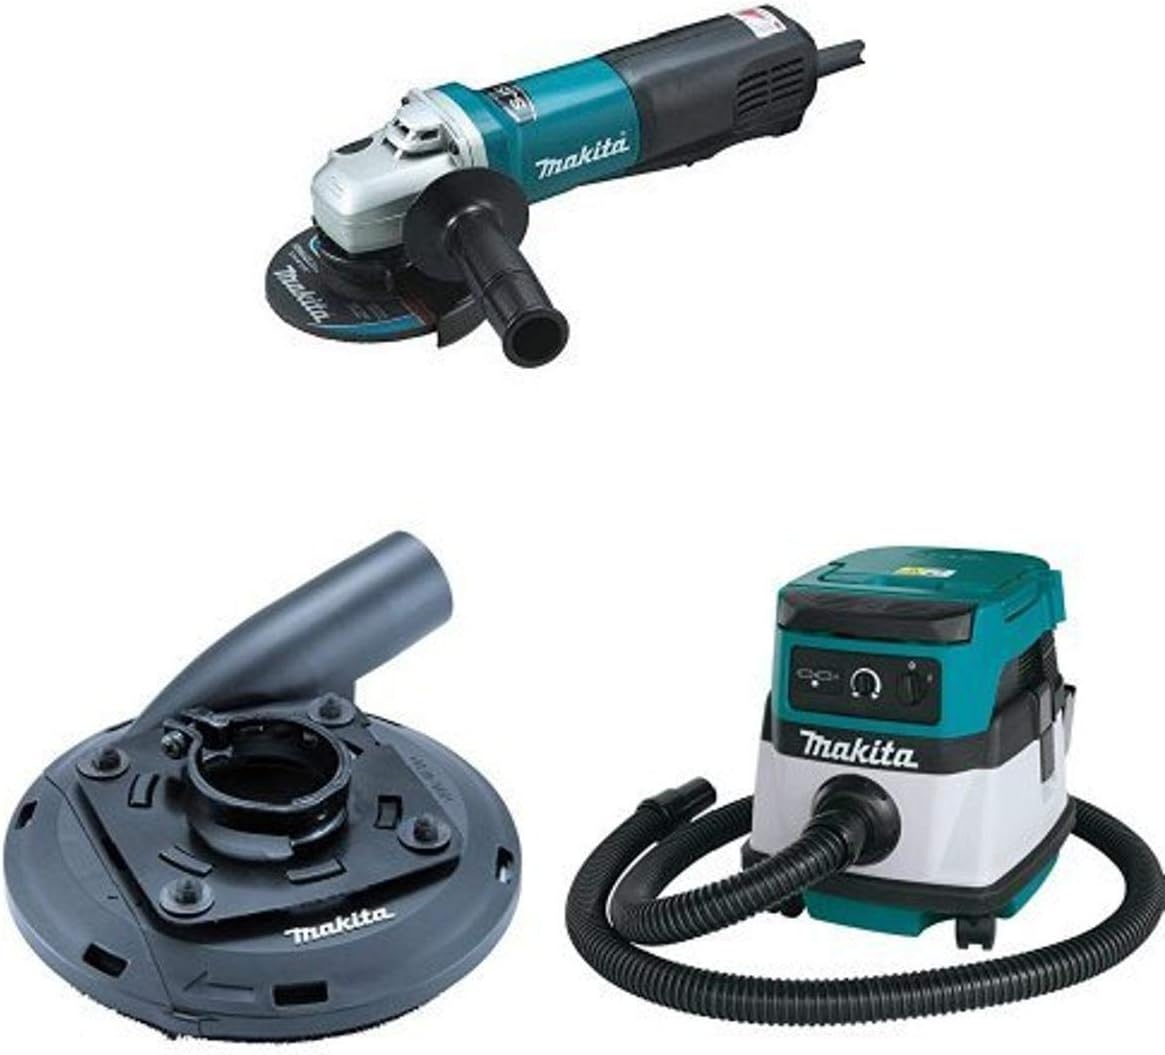 Makita 9565PCV 5-Inch SJS High-Power Paddle Switch Angle Grinder, 195236-5 Surface Grinding Shroud,  XCV04Z 18V X2 LXT (36V) 2.1 Gallon HEPA Filter Dry Dust Extractor/Vacuum